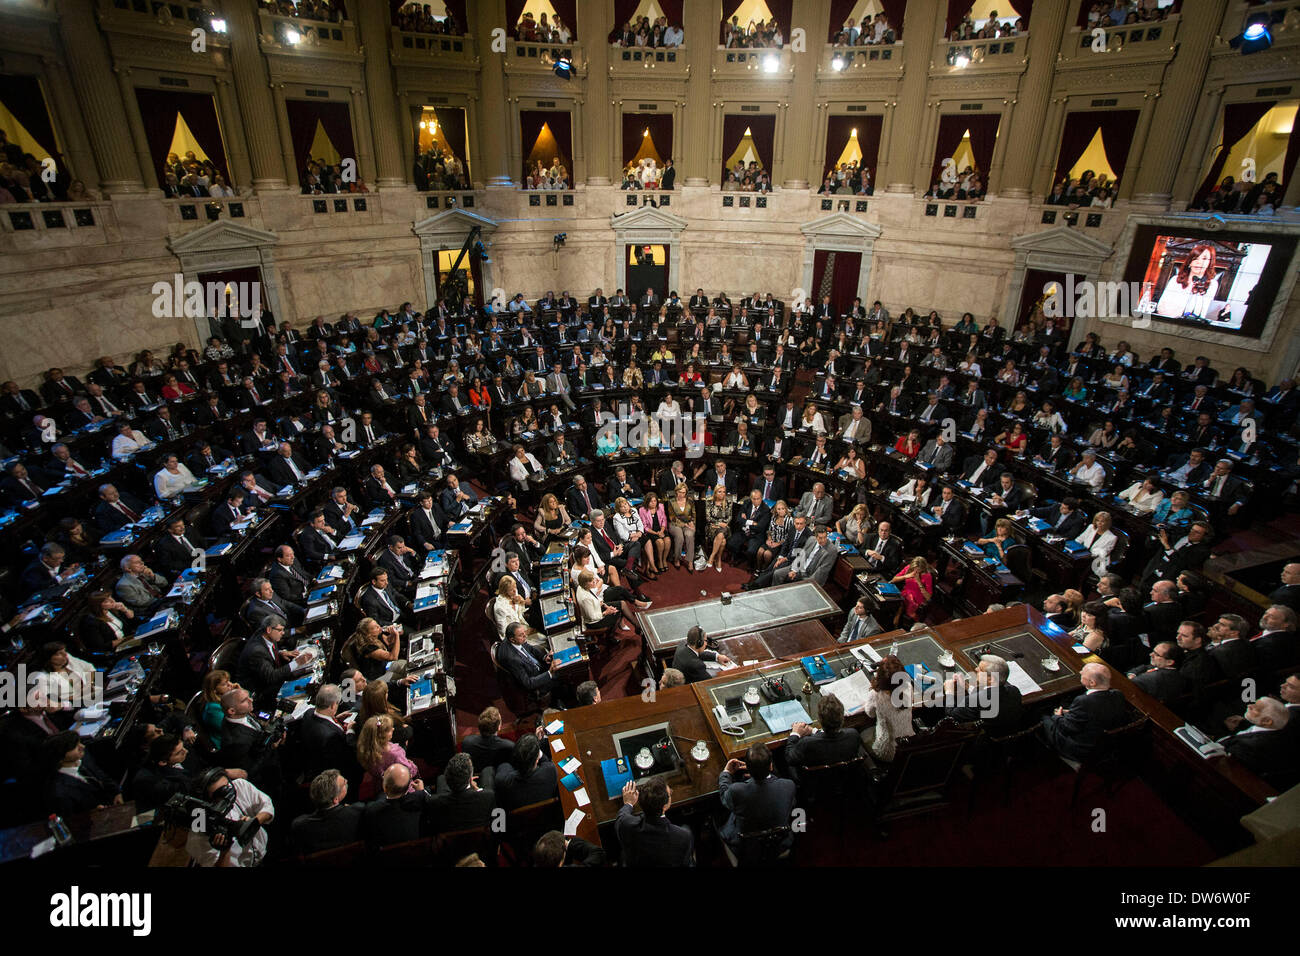 Buenos Aires, Argentina. 1st Mar, 2014. Legislators listen to the speech made by Argentina's President Cristina Fernandez during the inaugural assembly of the 132nd regular session of the National Congress in Buenos Aires, capital of Argentina, on March 1, 2014. Credit:  Martin Zabala/Xinhua/Alamy Live News Stock Photo